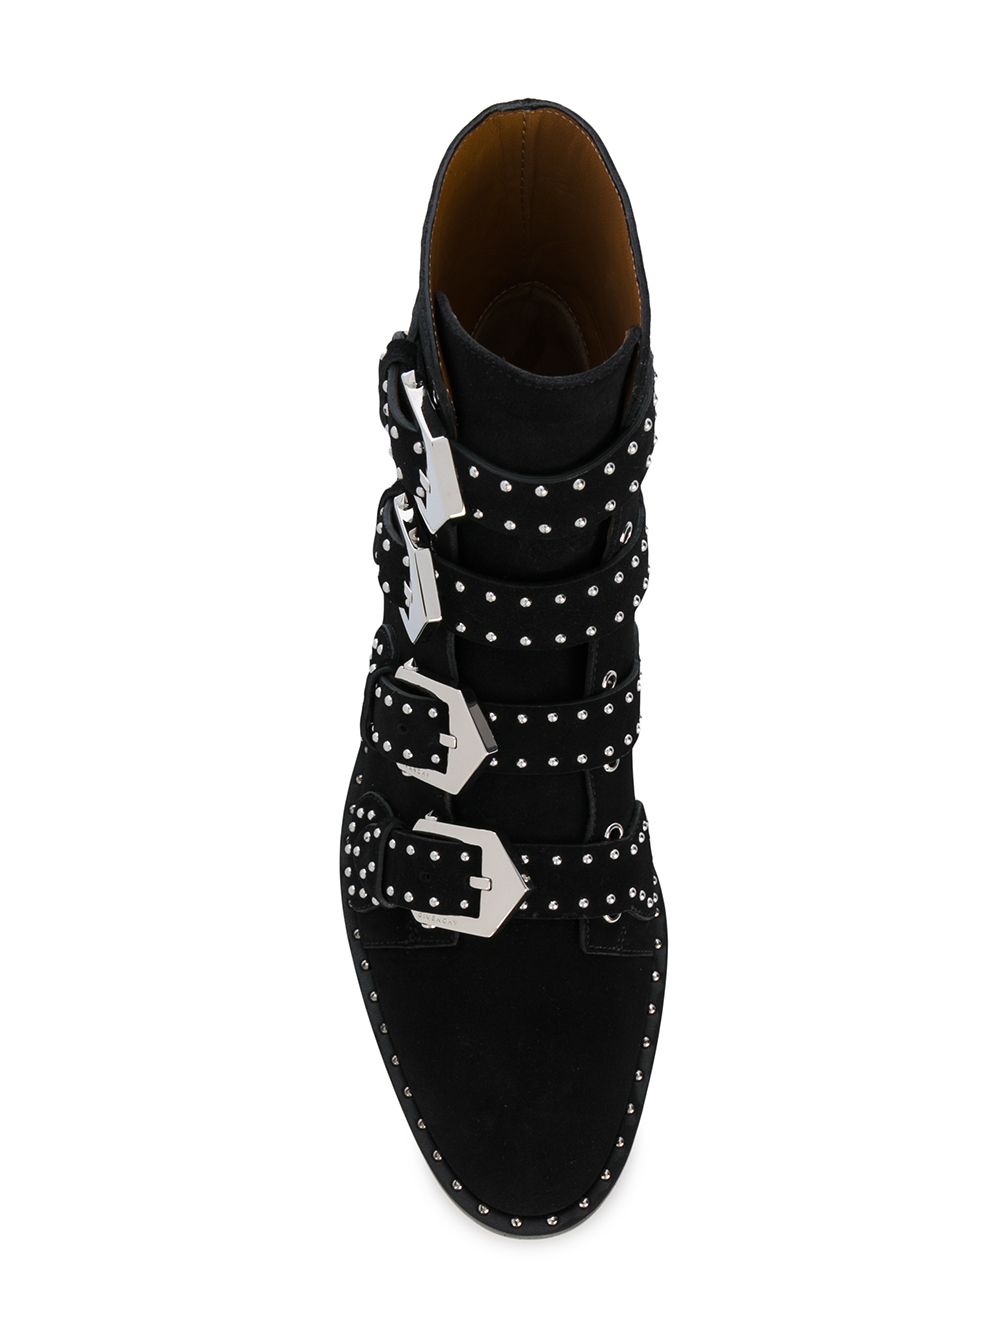 givenchy studded boots